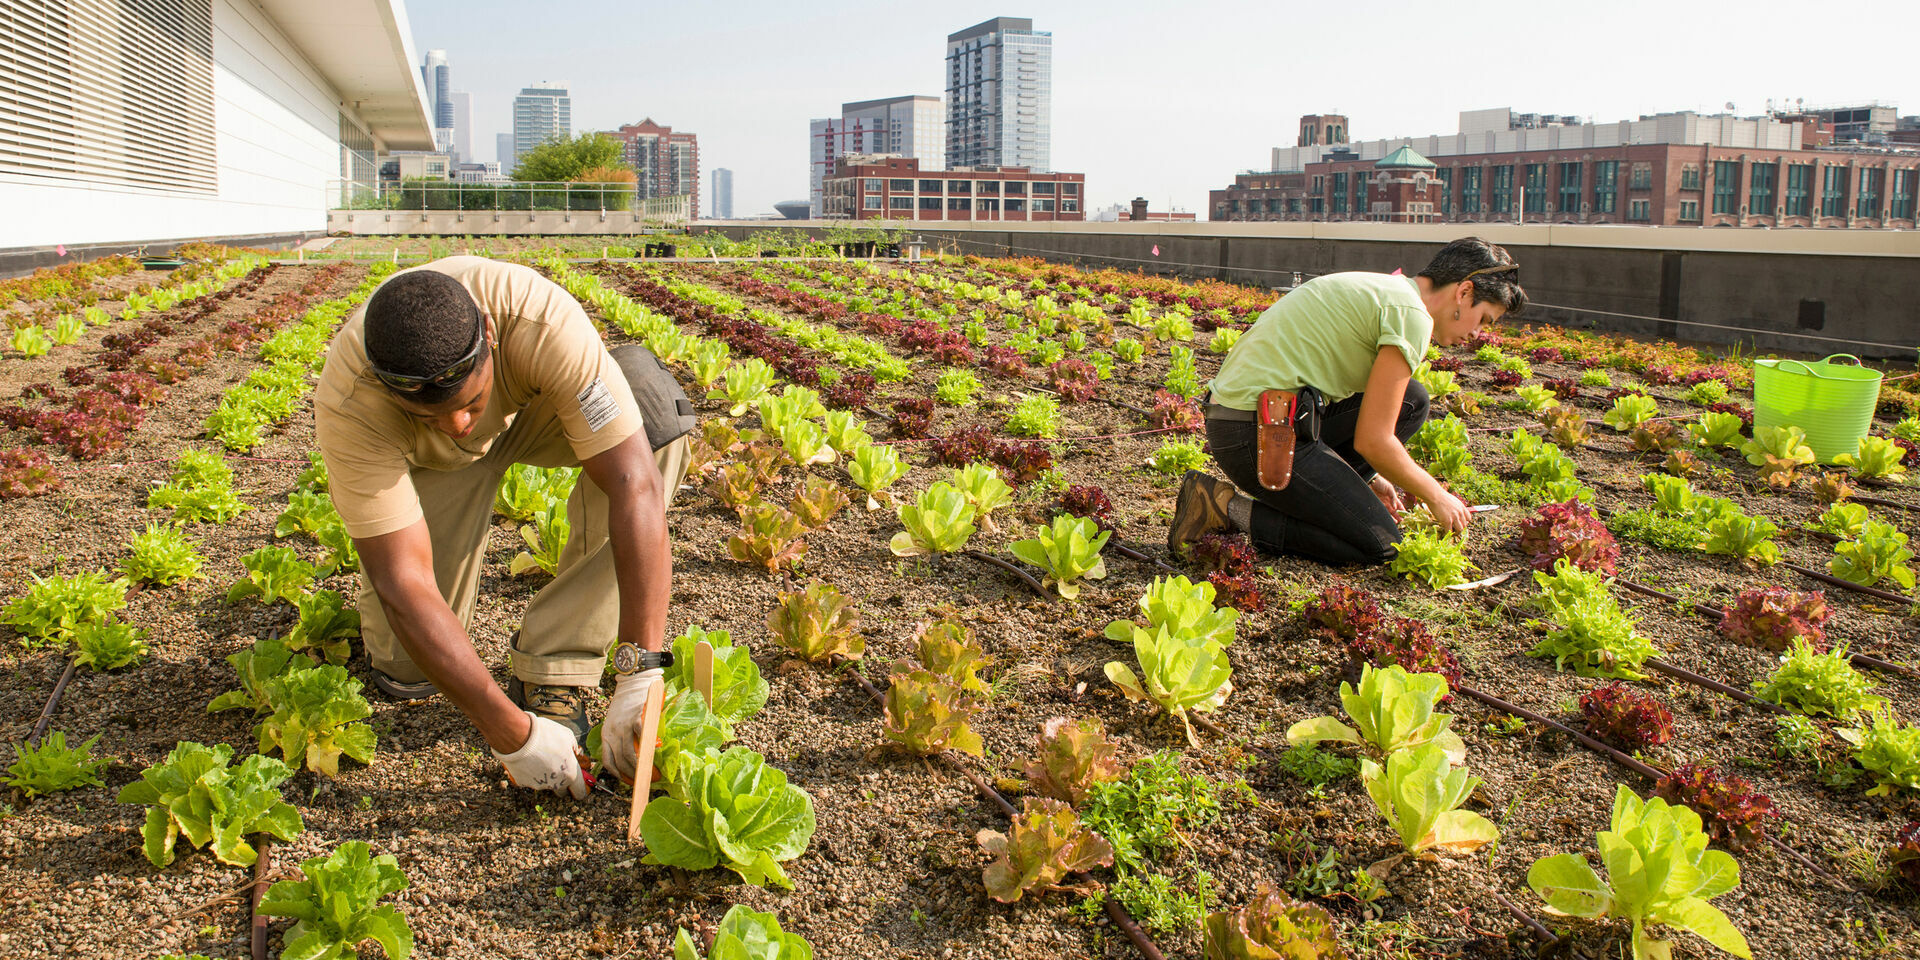 Rooftop gardens, vegetable gardens and ponds: city farming is taking over the world